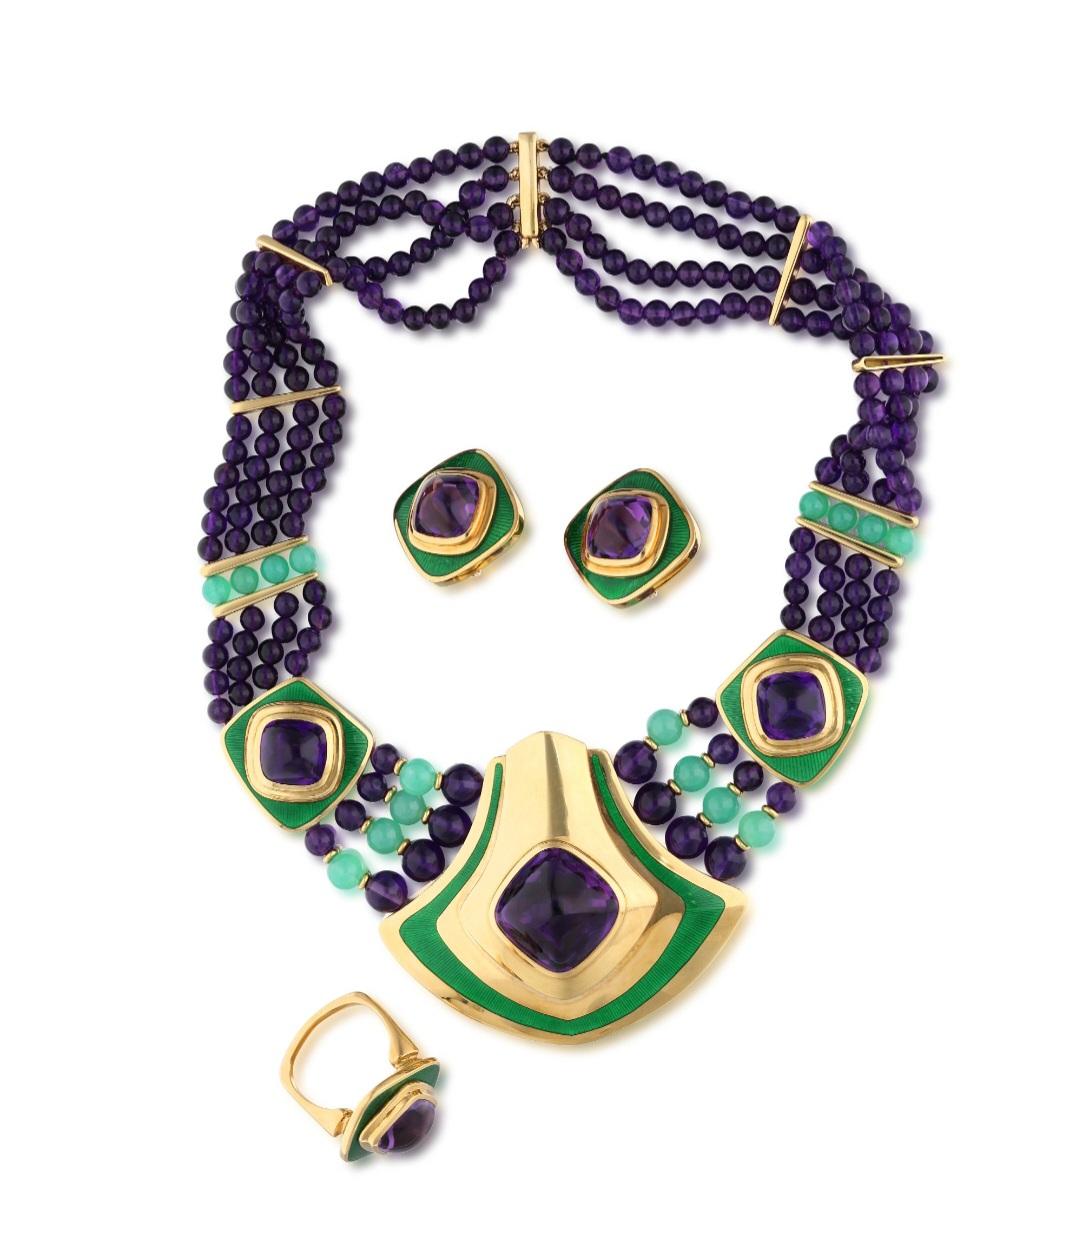 DE VROOMEN: HARMONY IN COLOUR AND FORM - Extraordinary Collectors Piece : Phenomenal jewelry Parure composed of buff-top Amethysts, Chrysoprase beads, Enamel and 18k Yellow Gold.
Started in 1967 by Leo and Ginnie de Vroomen the company is known for